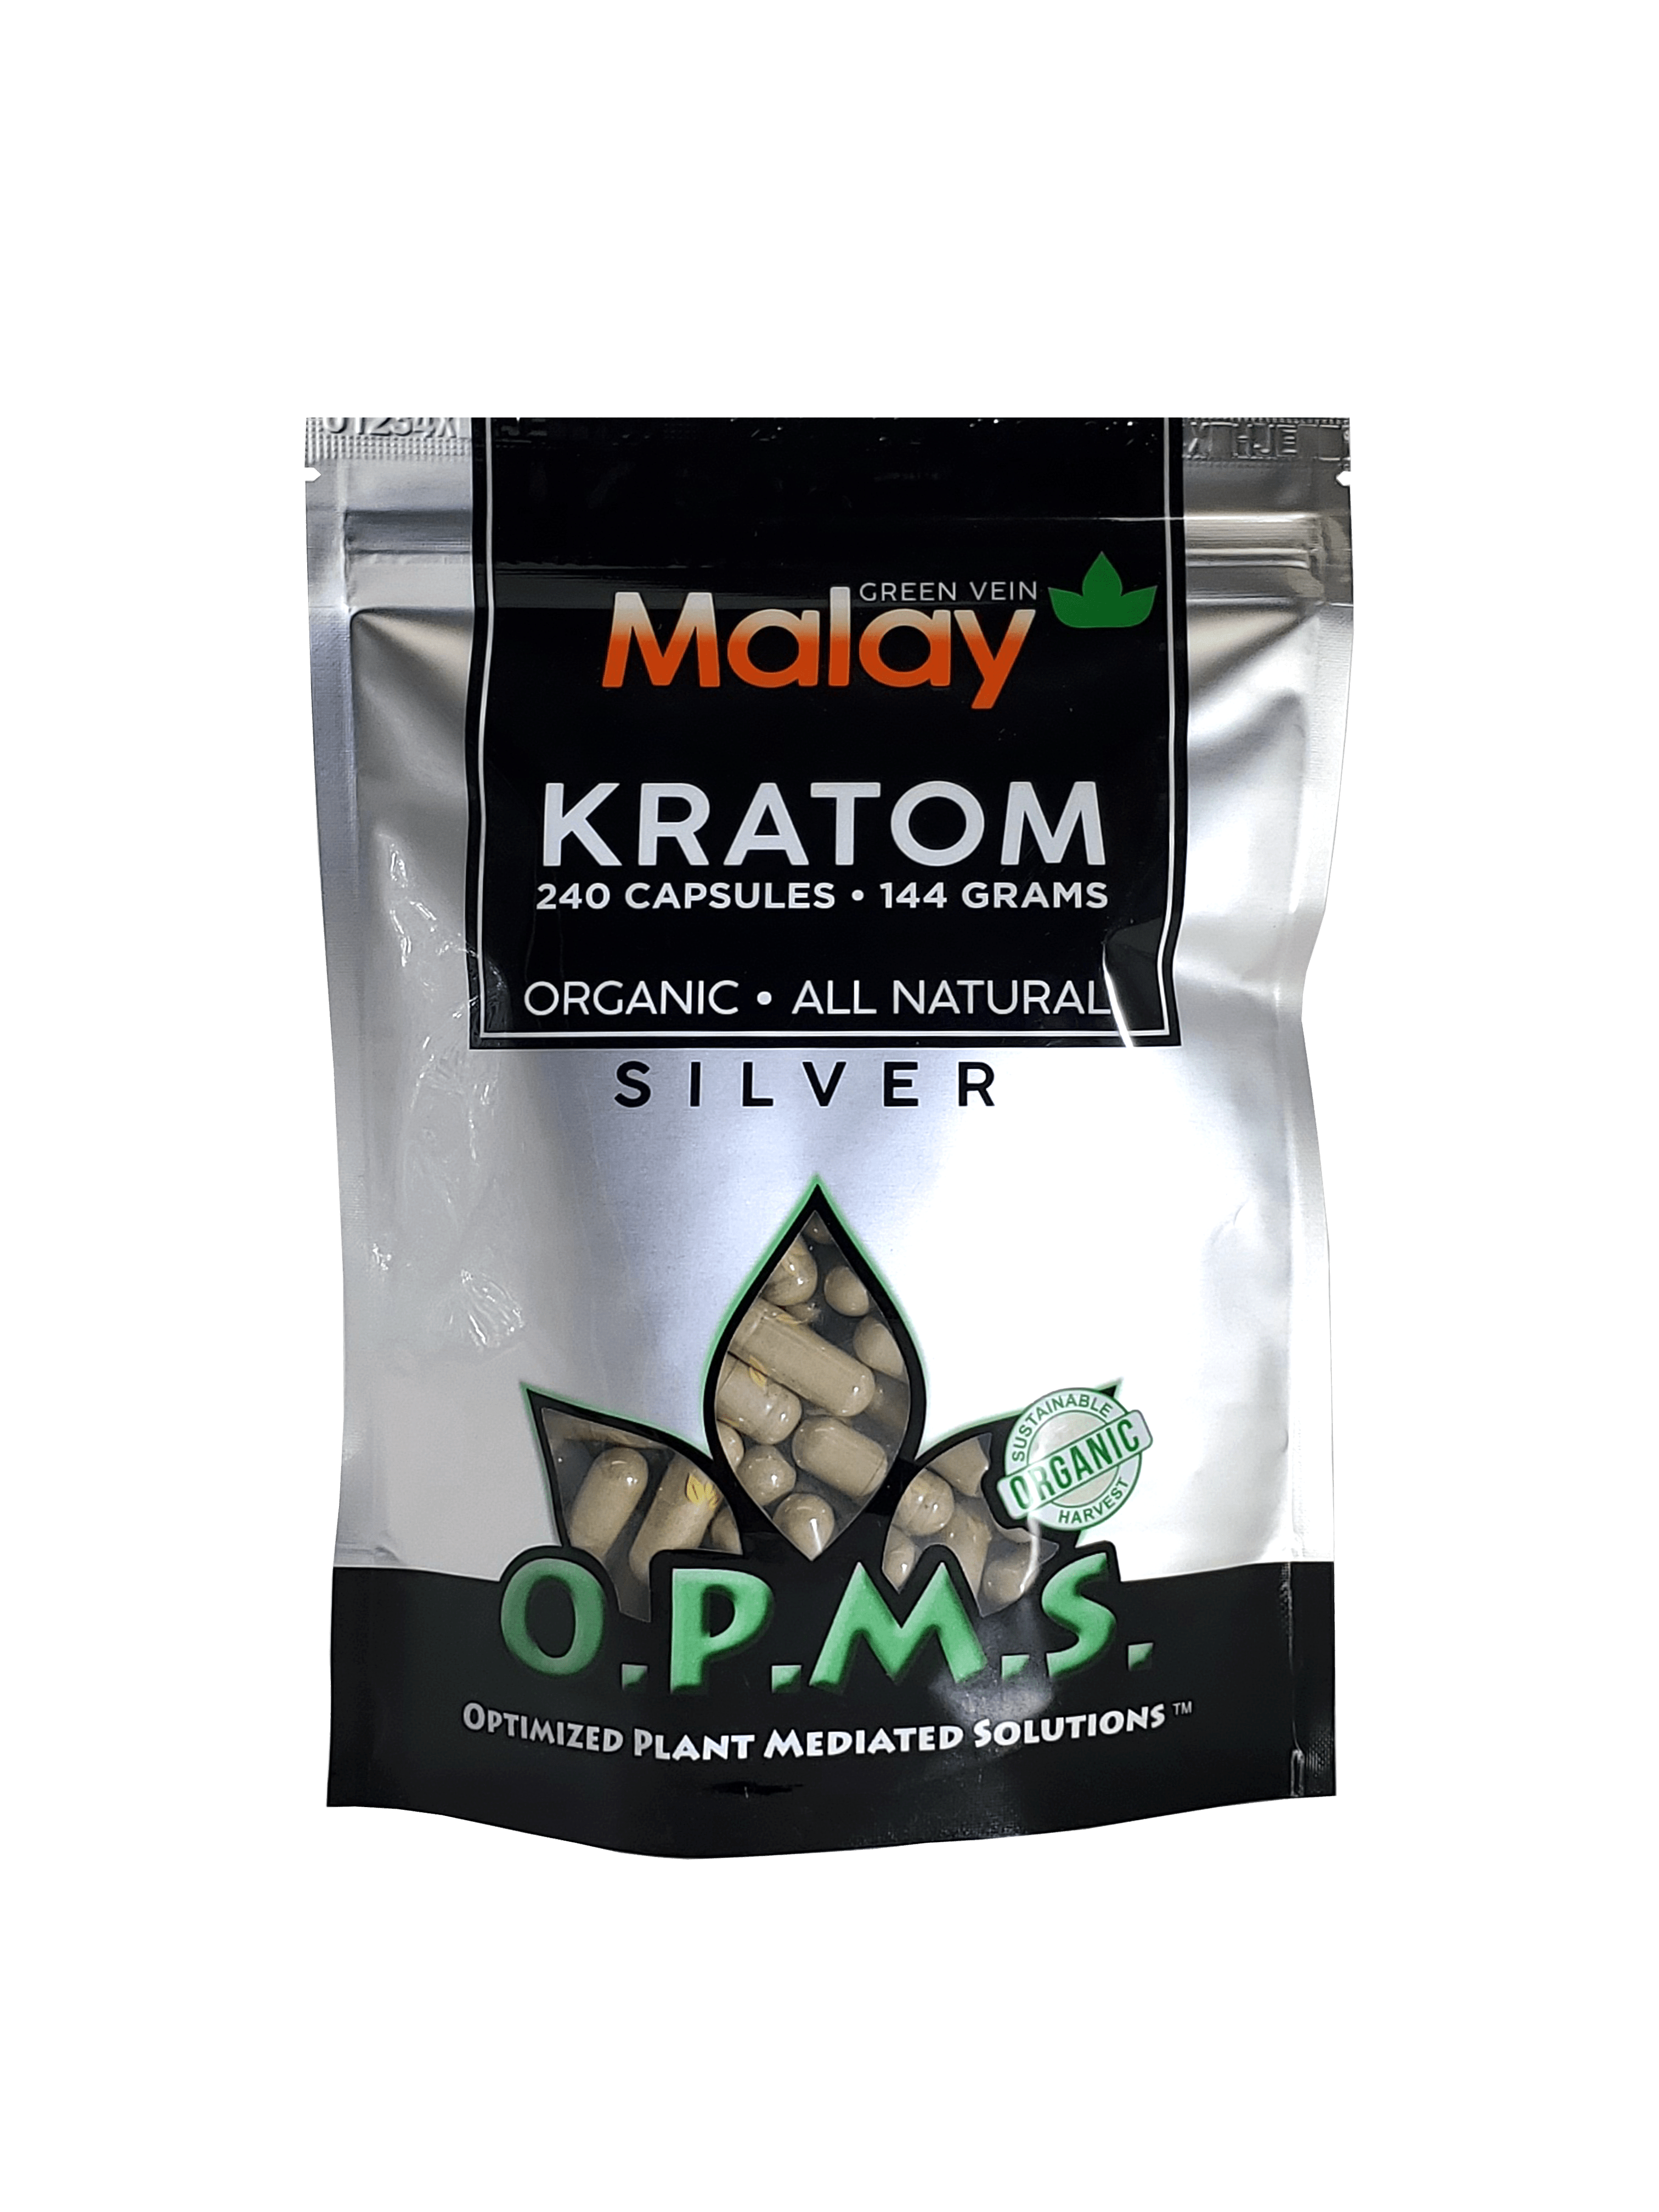 O.P.M.S. Silver Capsules Kratom OPMS Green Vein Malay 16 Count 